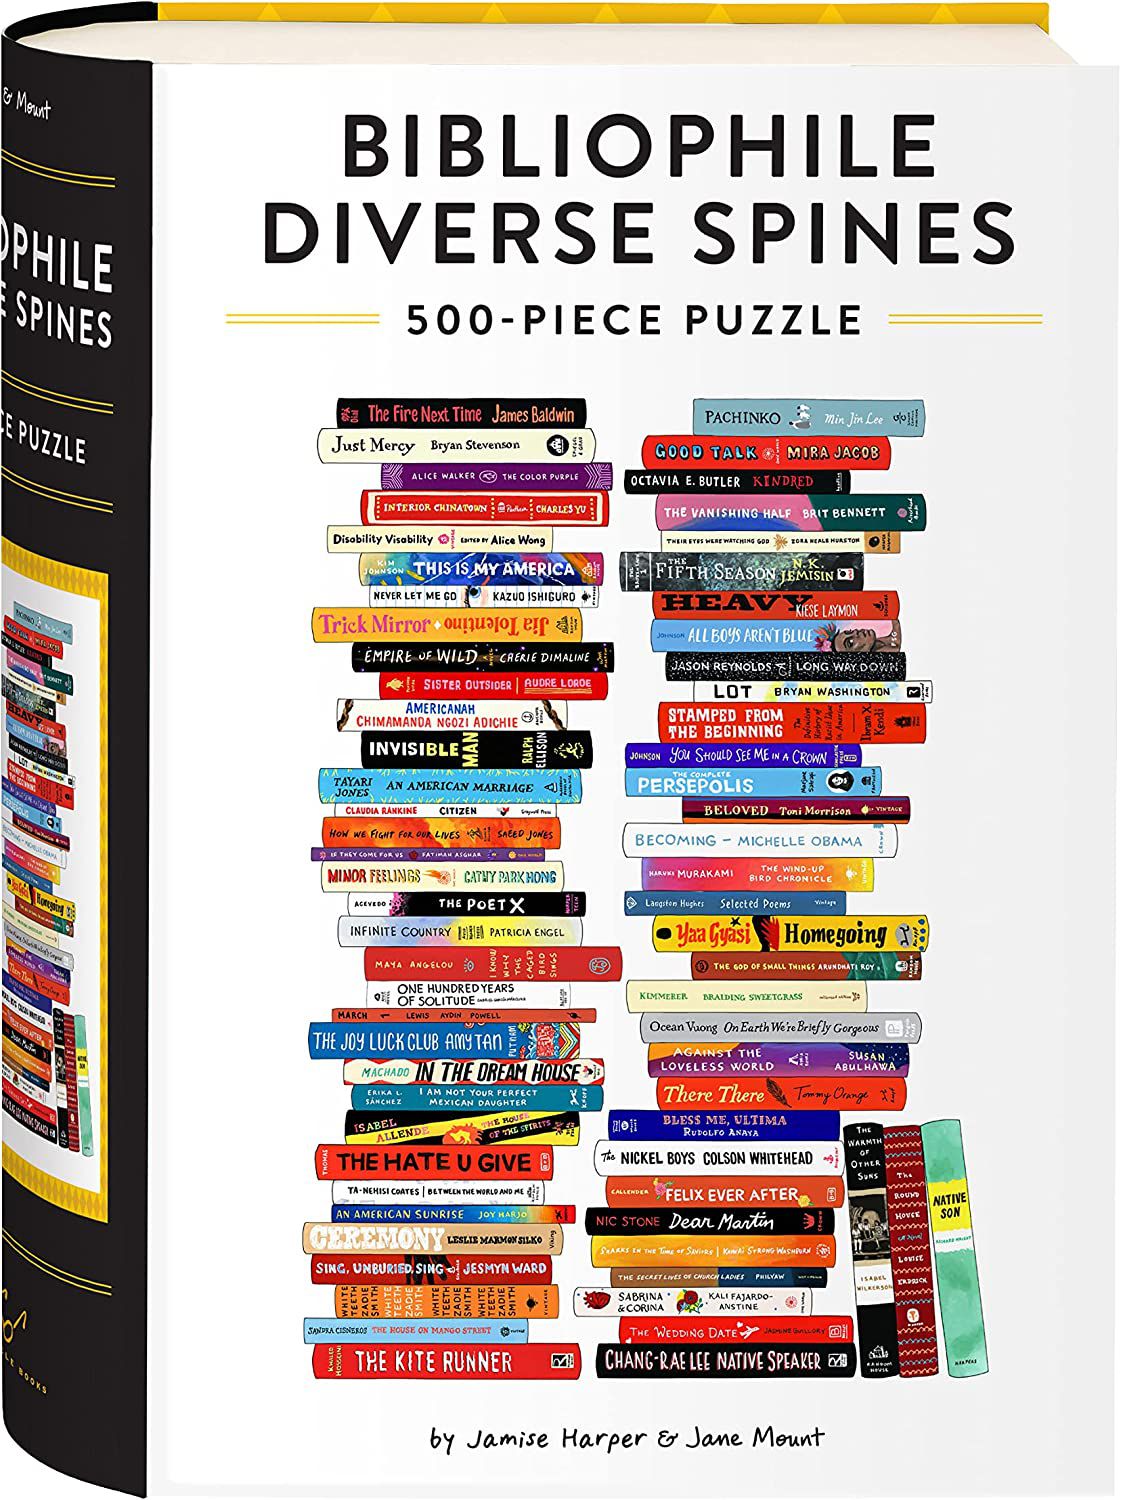 Image of a Jane Mount puzzle featuring diverse book spines